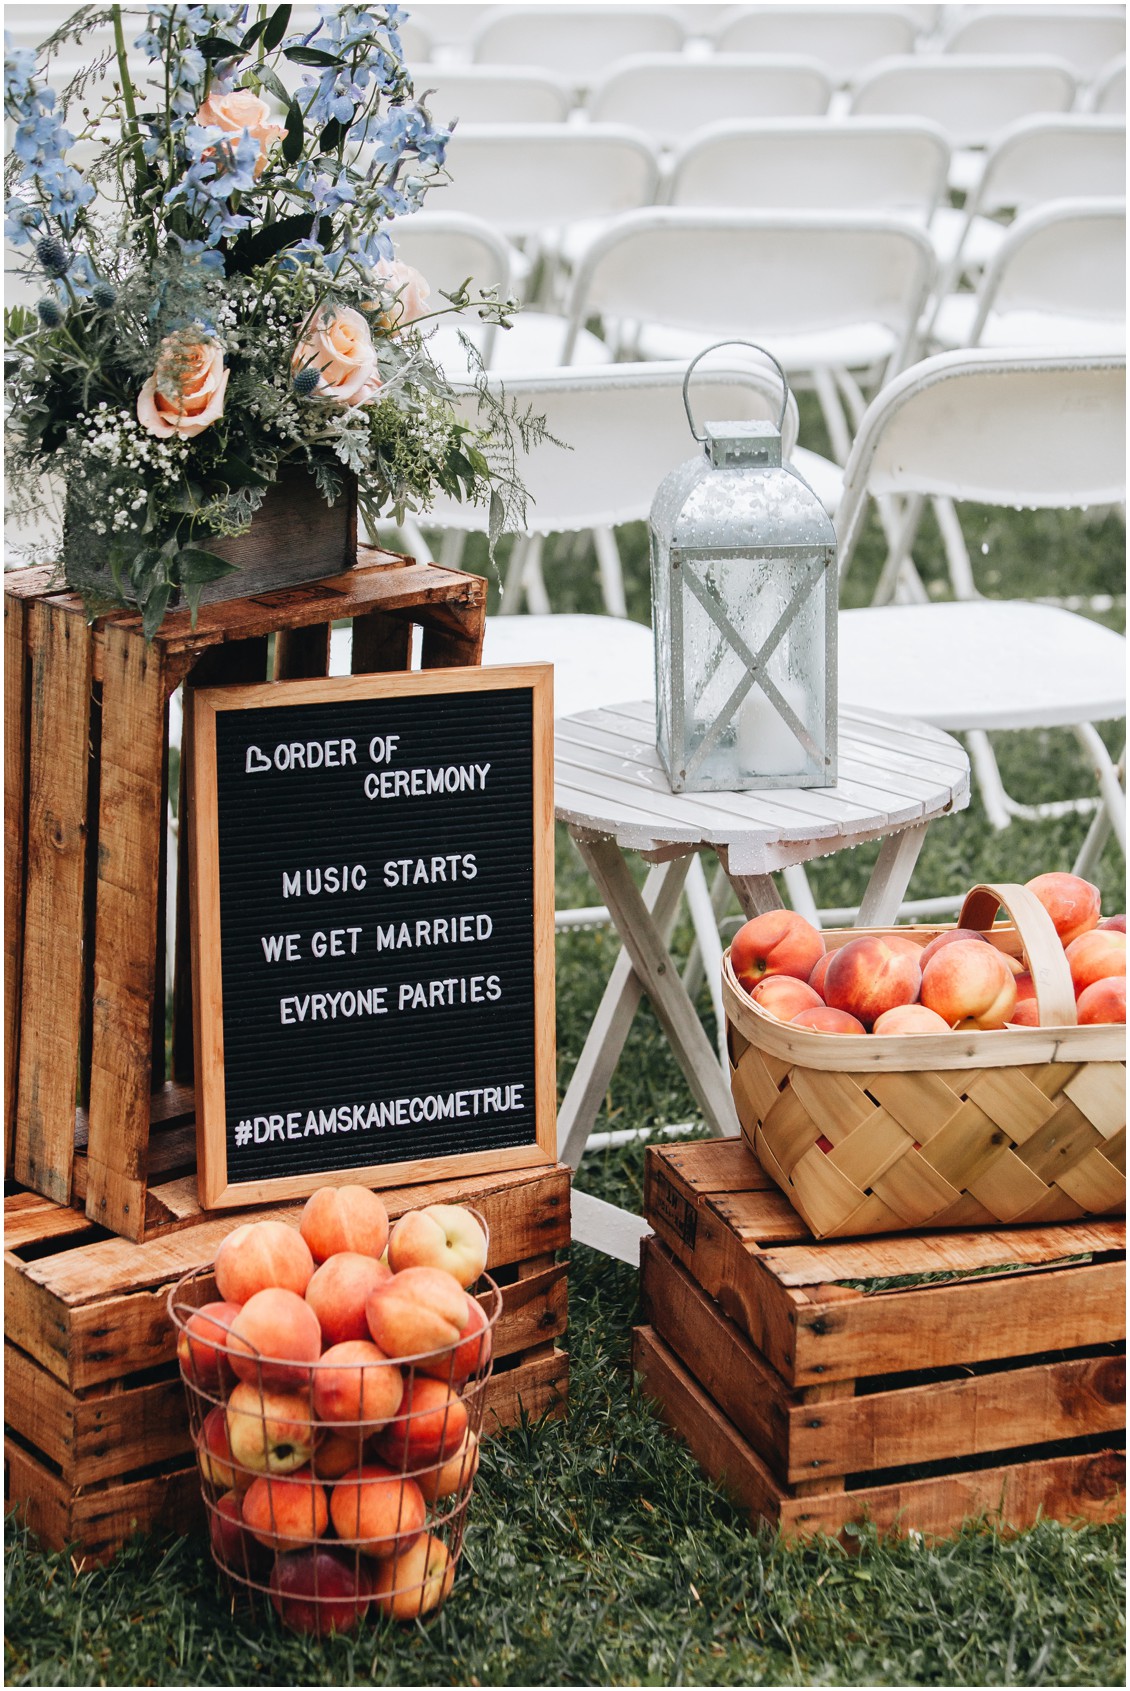 Wedding sign, baskets of peaches, and flowers by Jen-Mor Florist. | My Eastern Shore Wedding | 